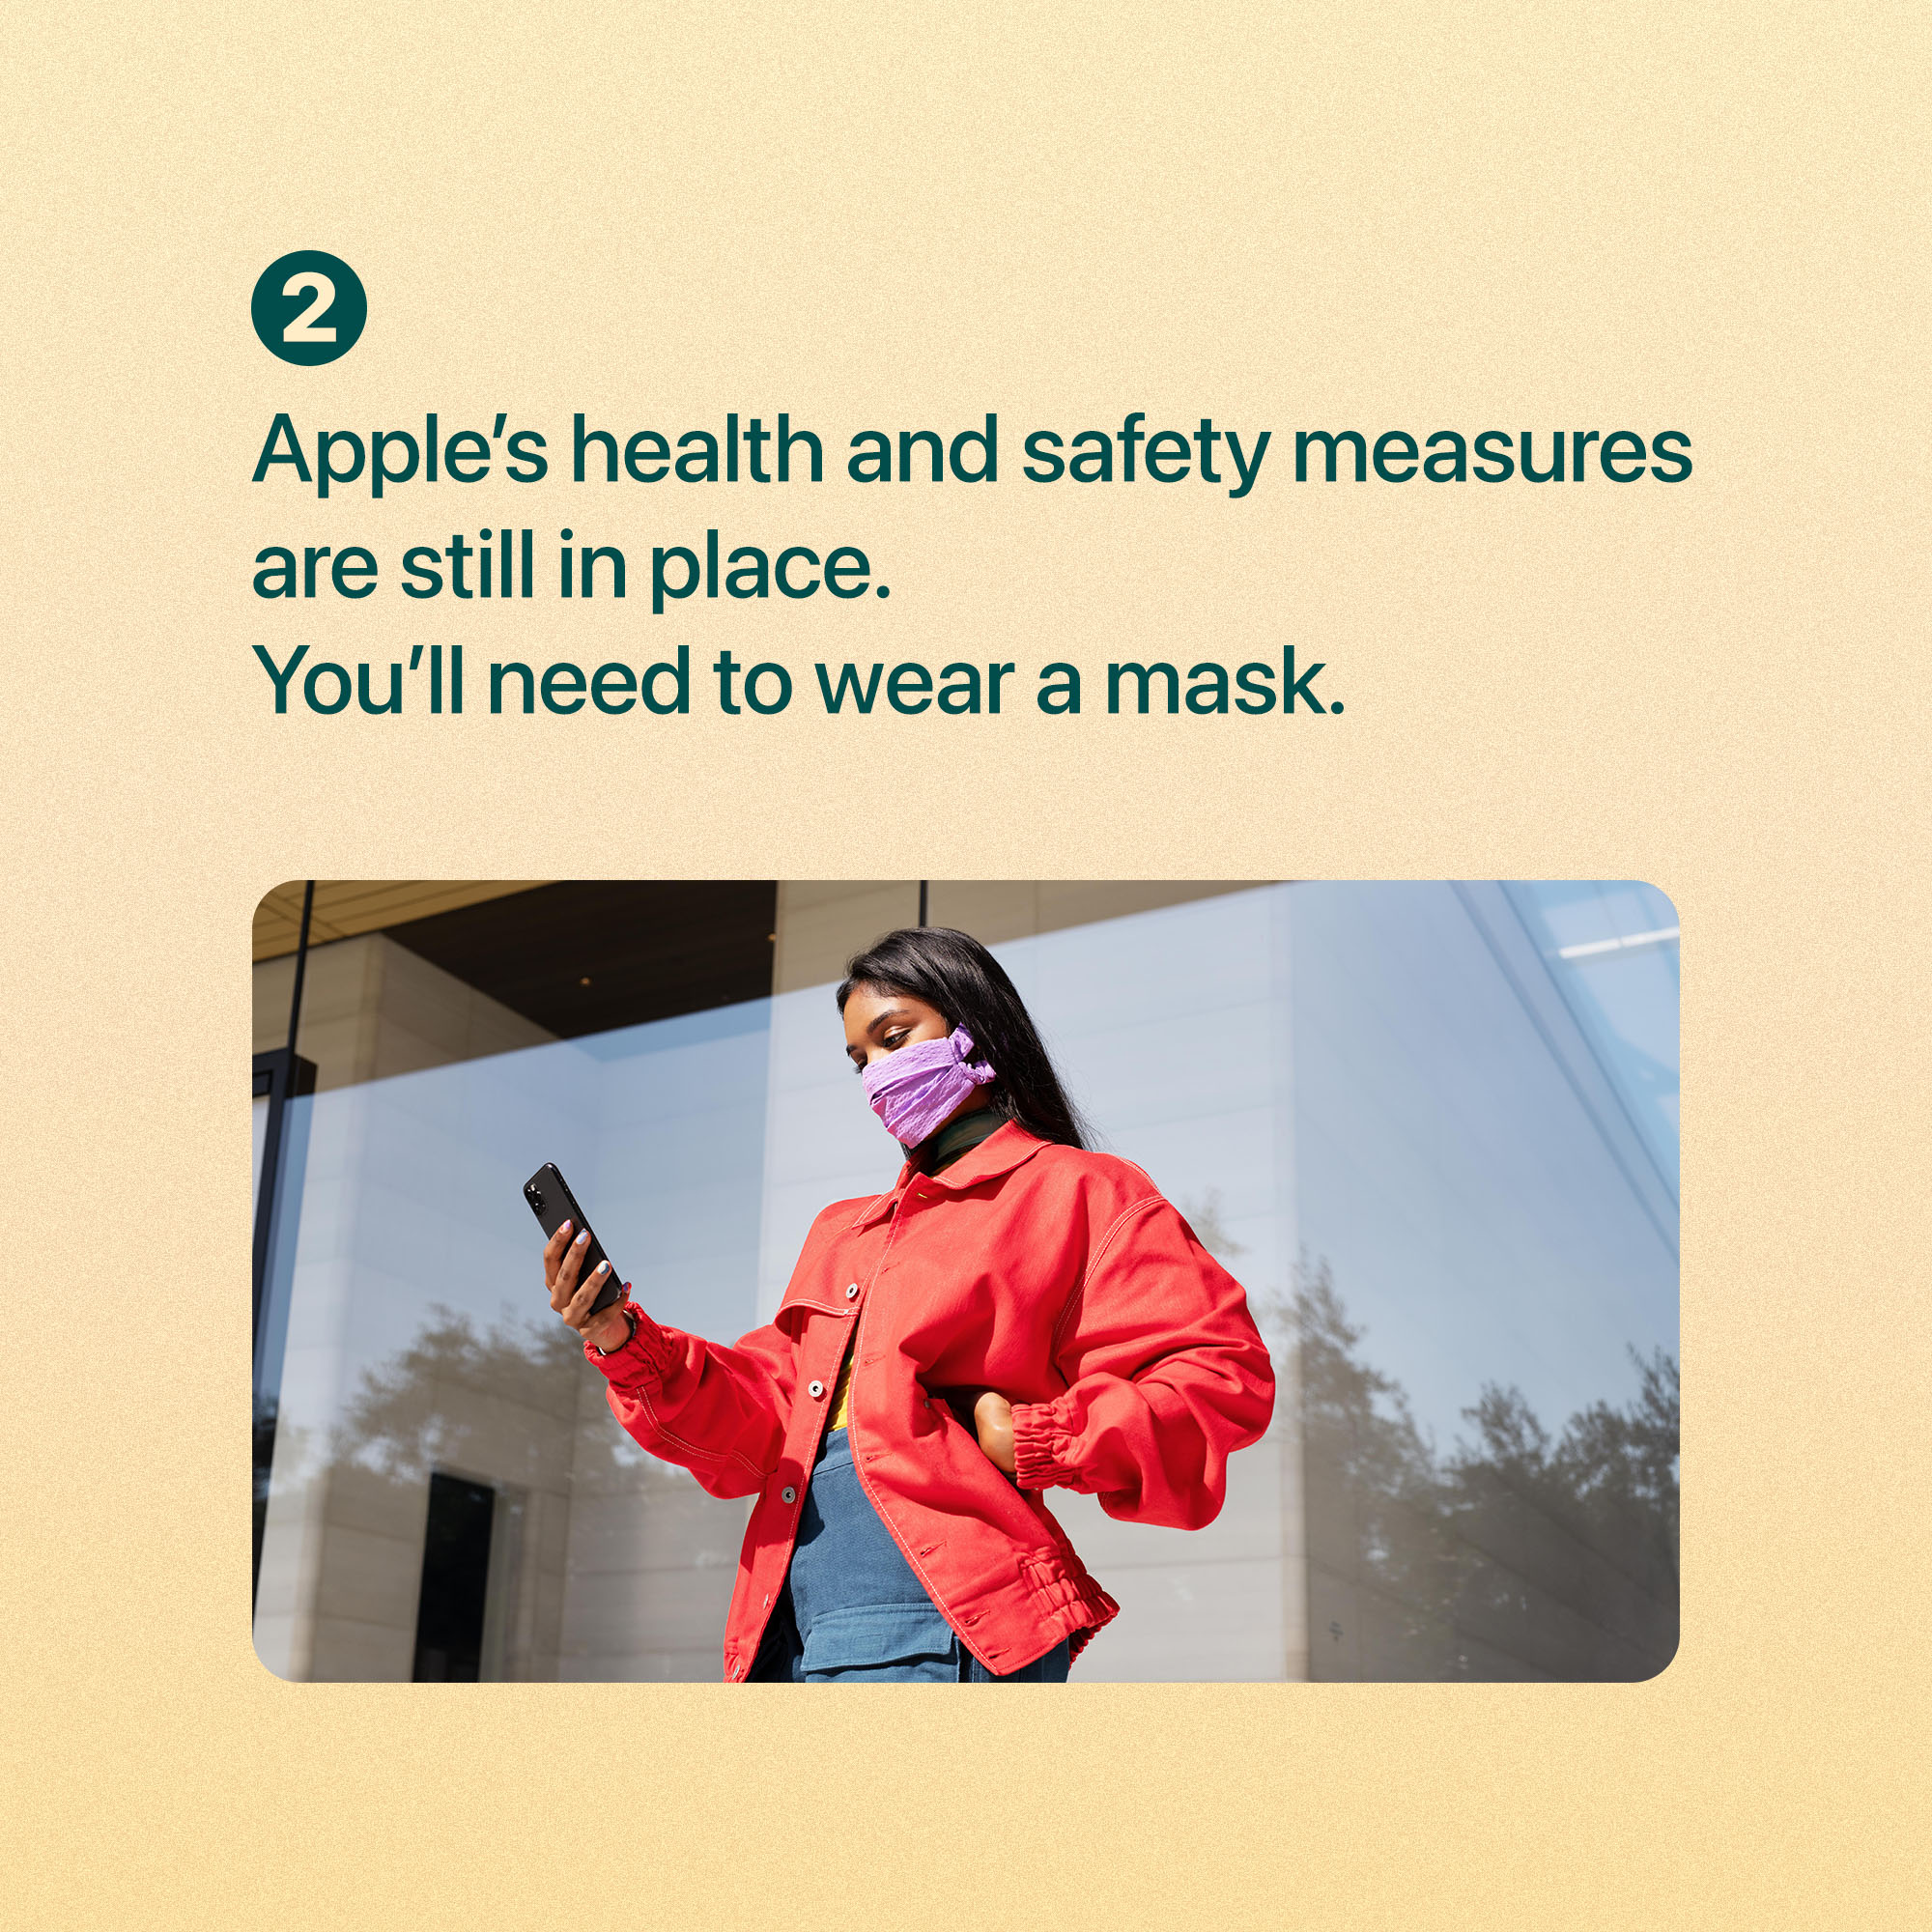 Apple's health and safety measures are still in place. You'll need to wear a mask.